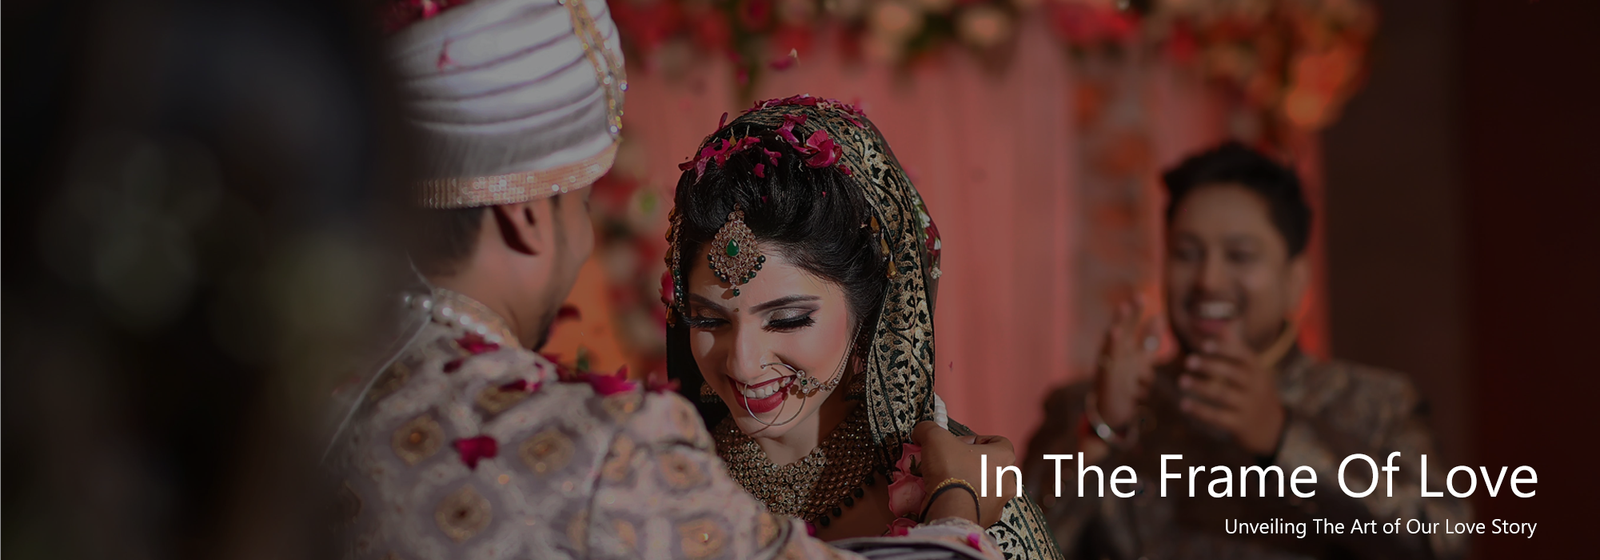 Wedding Photography in Delhi, Wedding Photographer for marriage and Functions